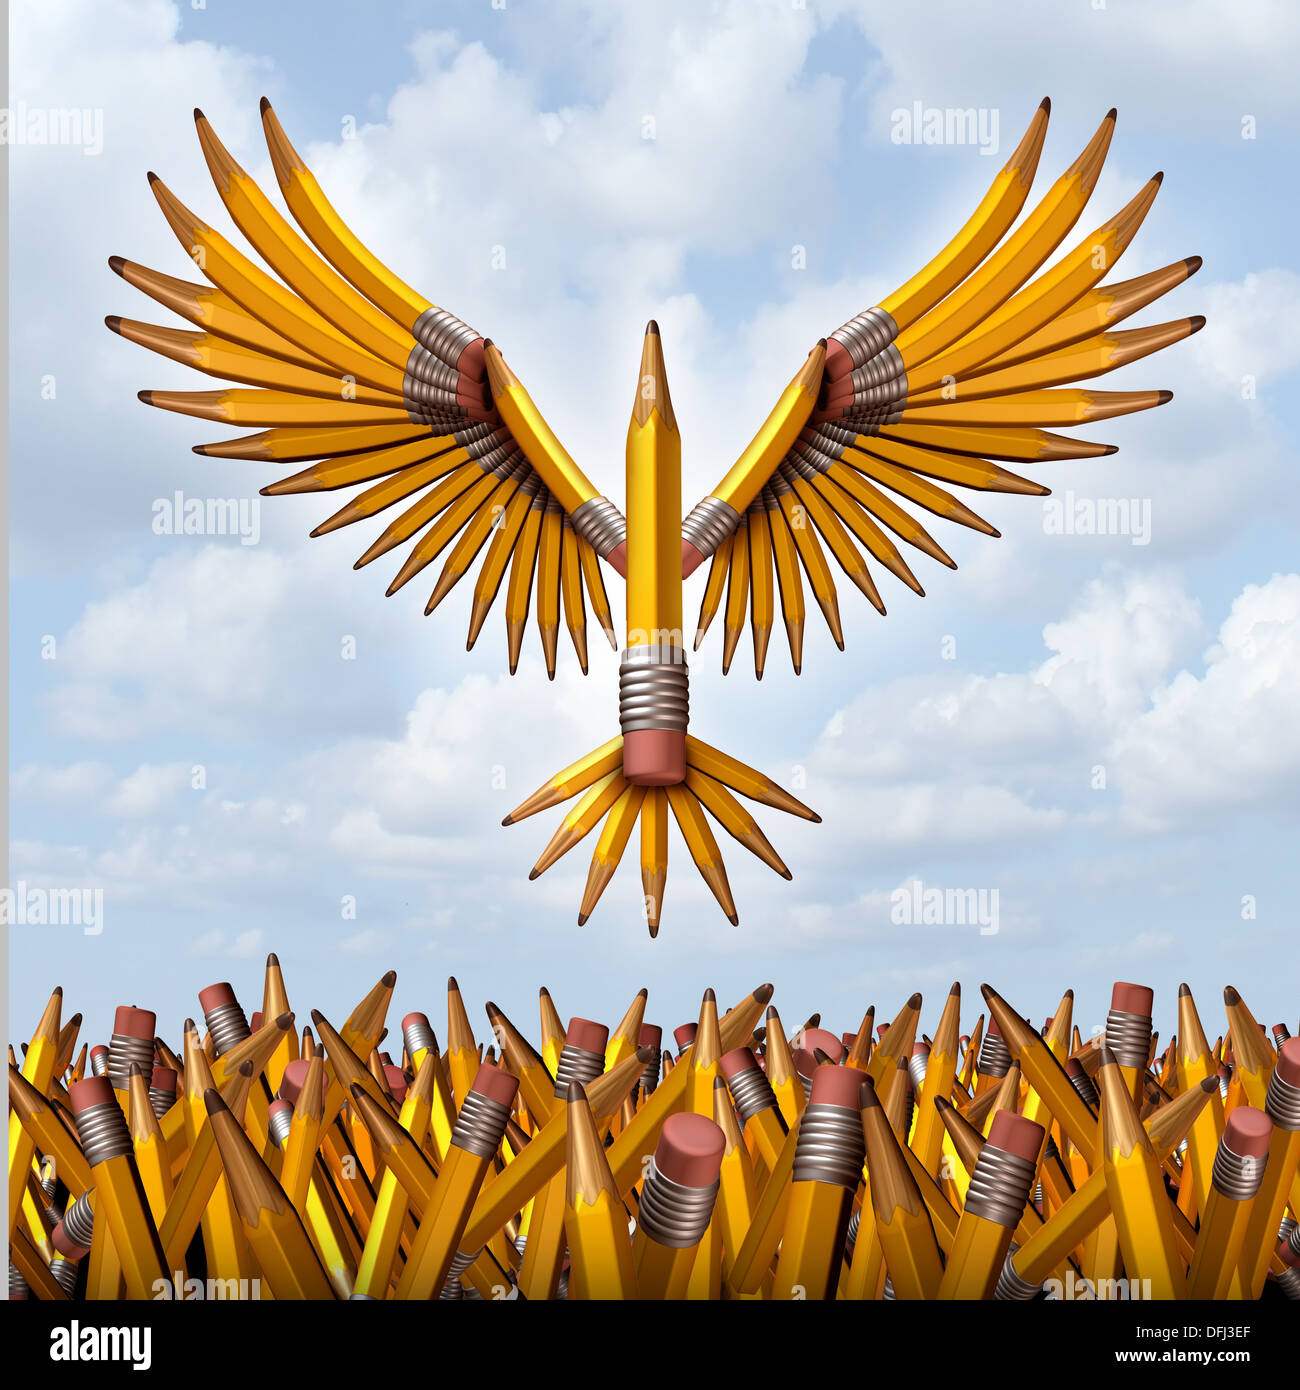 Take flight creative success concept with a group of three dimensional yellow pencils in the shape of a bird taking off and escaping confusion to freedom as a symbol of education programs and creativity in business innovation Stock Photo